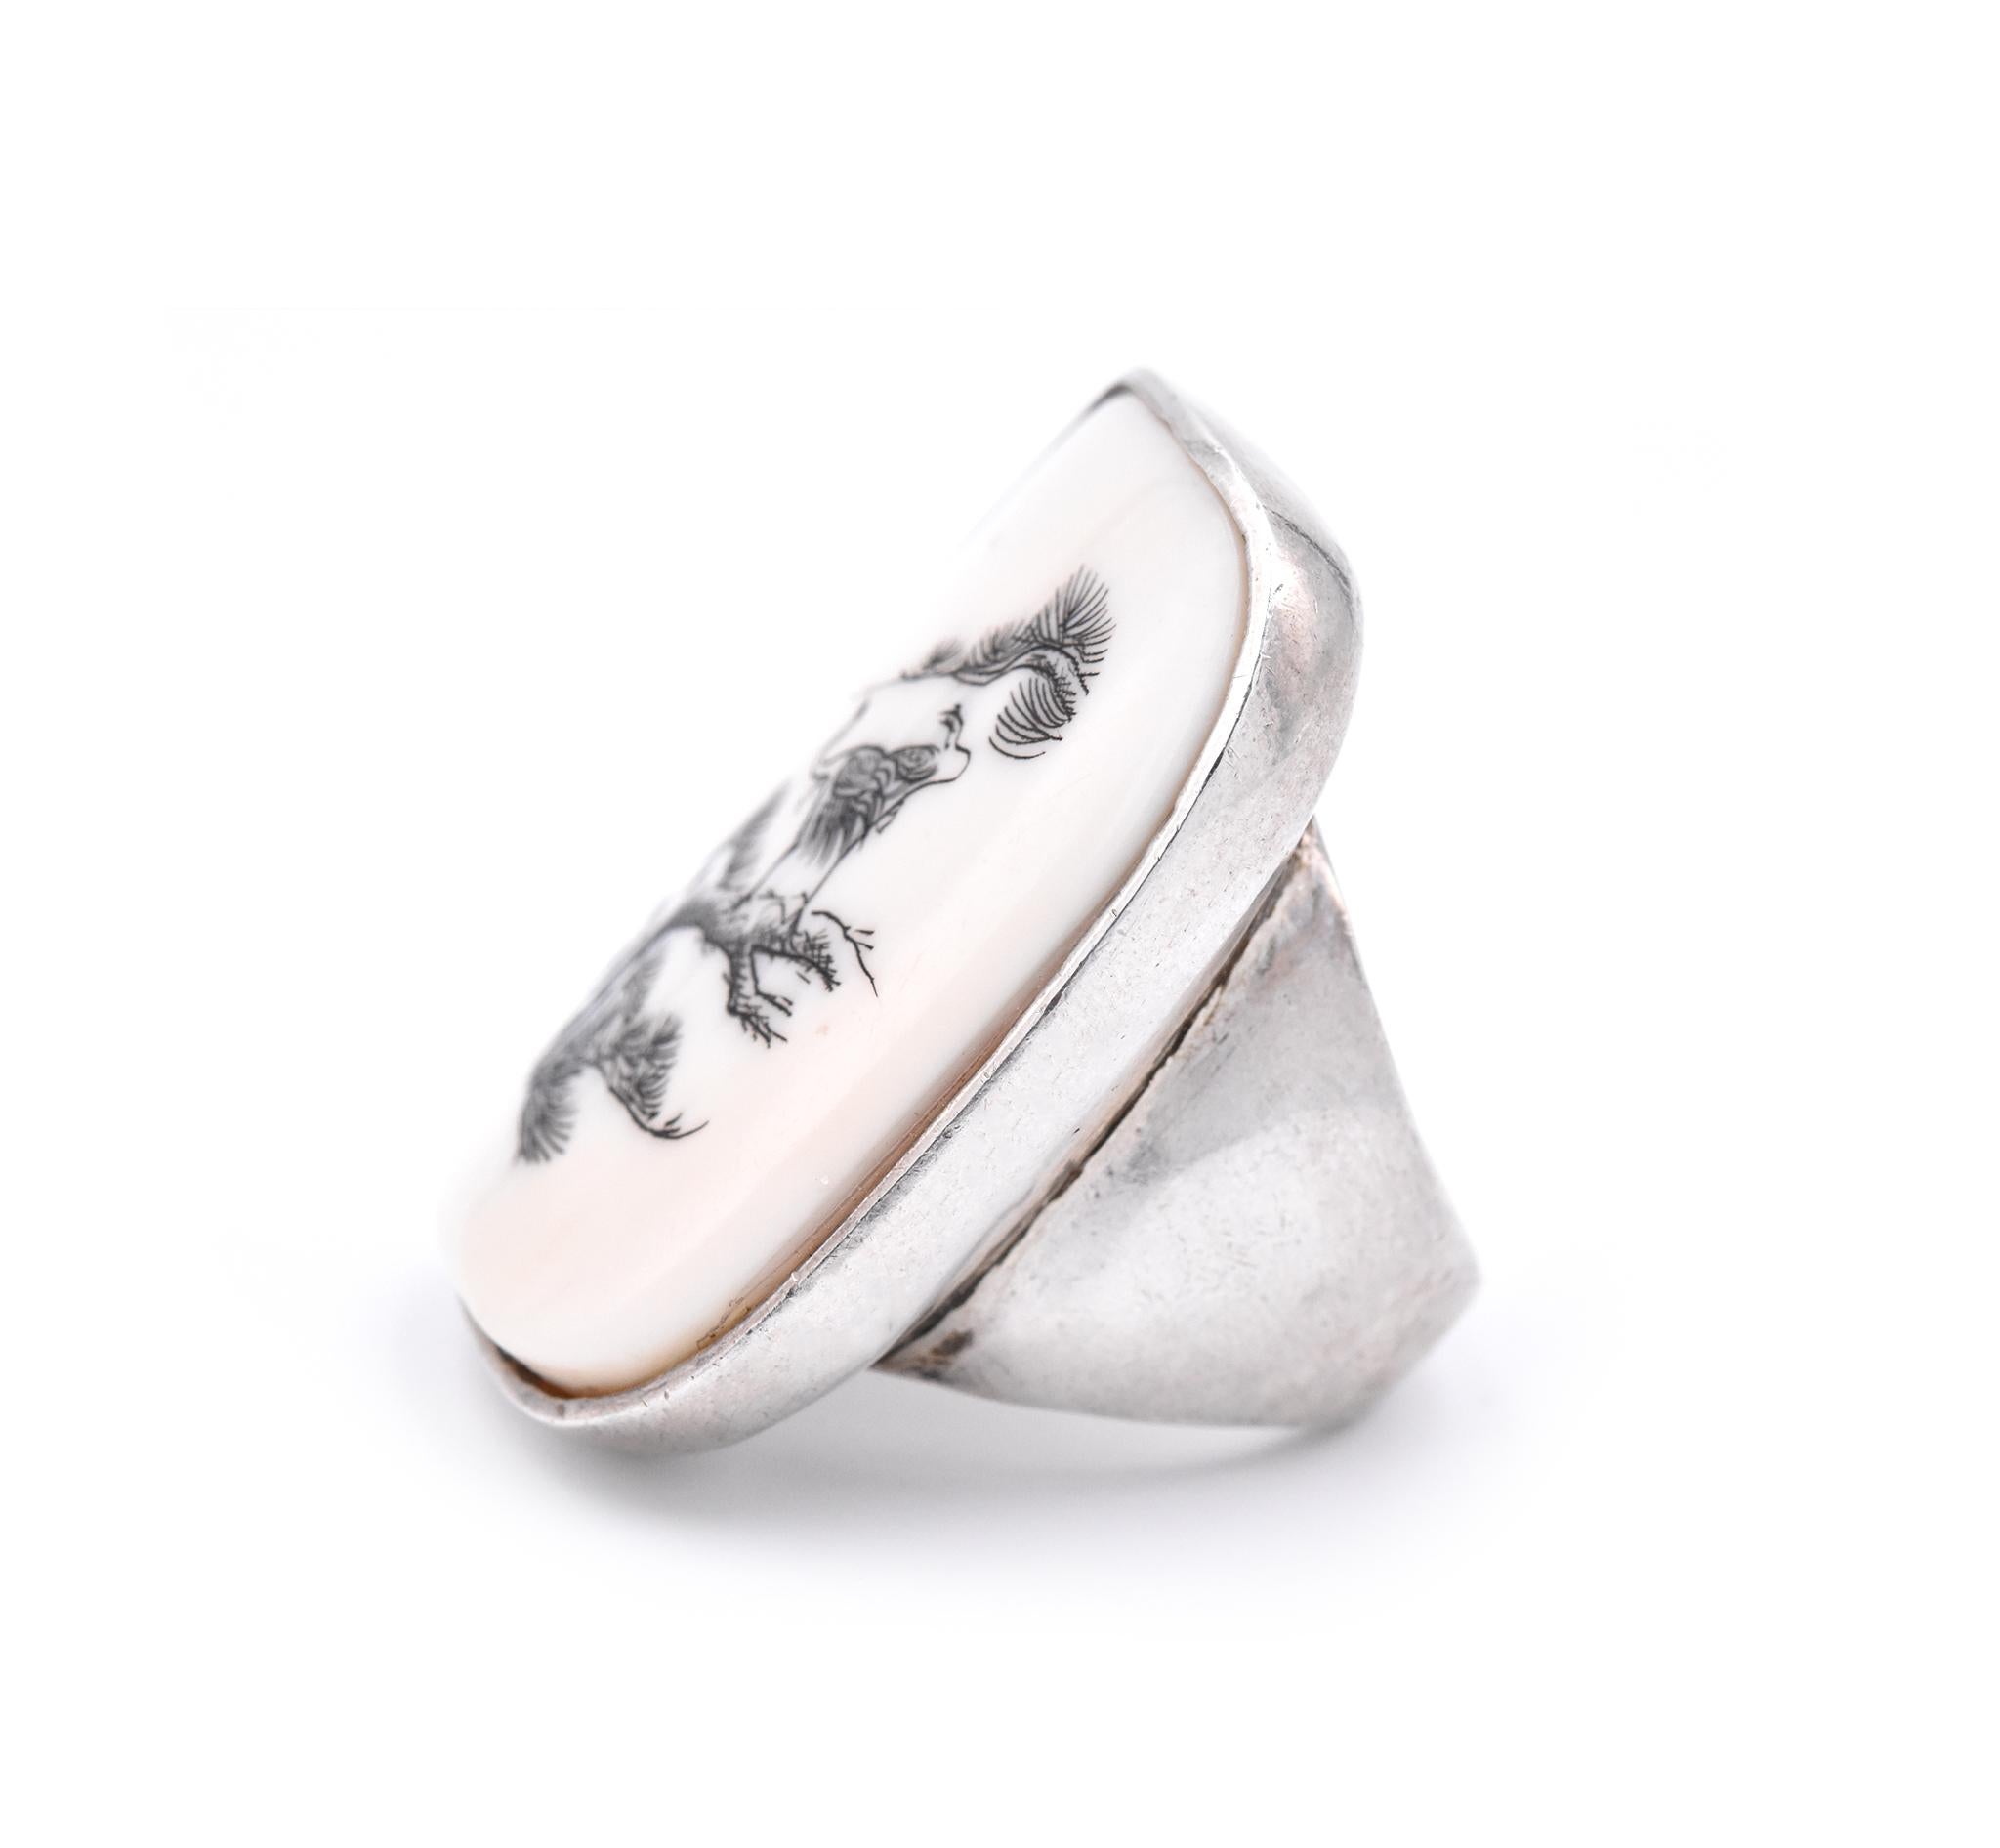 Material: sterling silver
Ring size: 10 (please allow up to two additional business days for sizing requests)
Dimensions: ring band measures 41.35mm X 30.77mm
Weight: 40.21 grams
